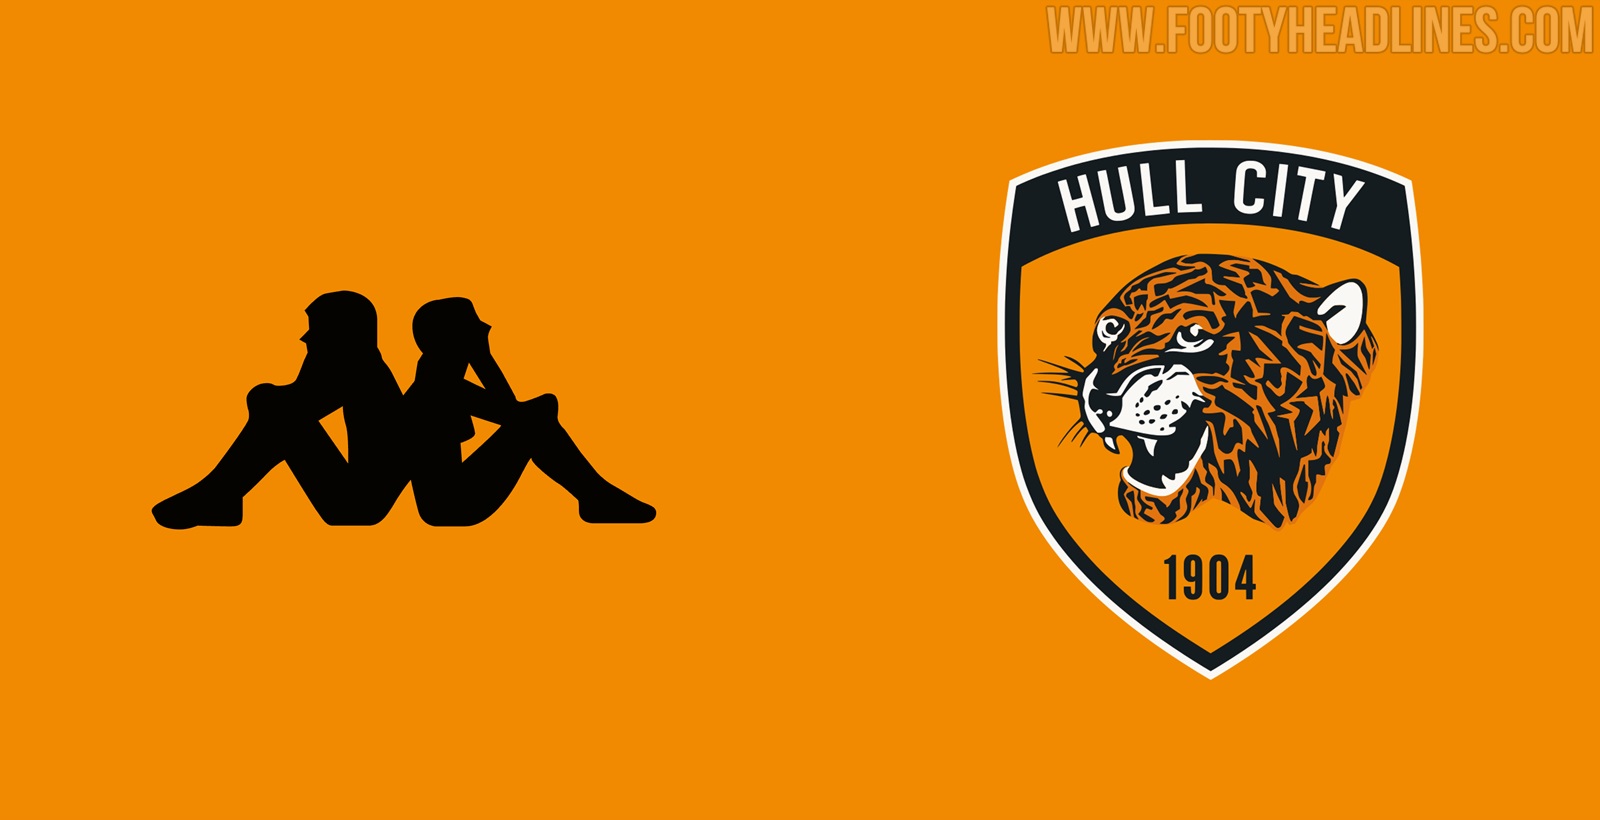 Hull City Announce Deal + Home Kit - Footy Headlines